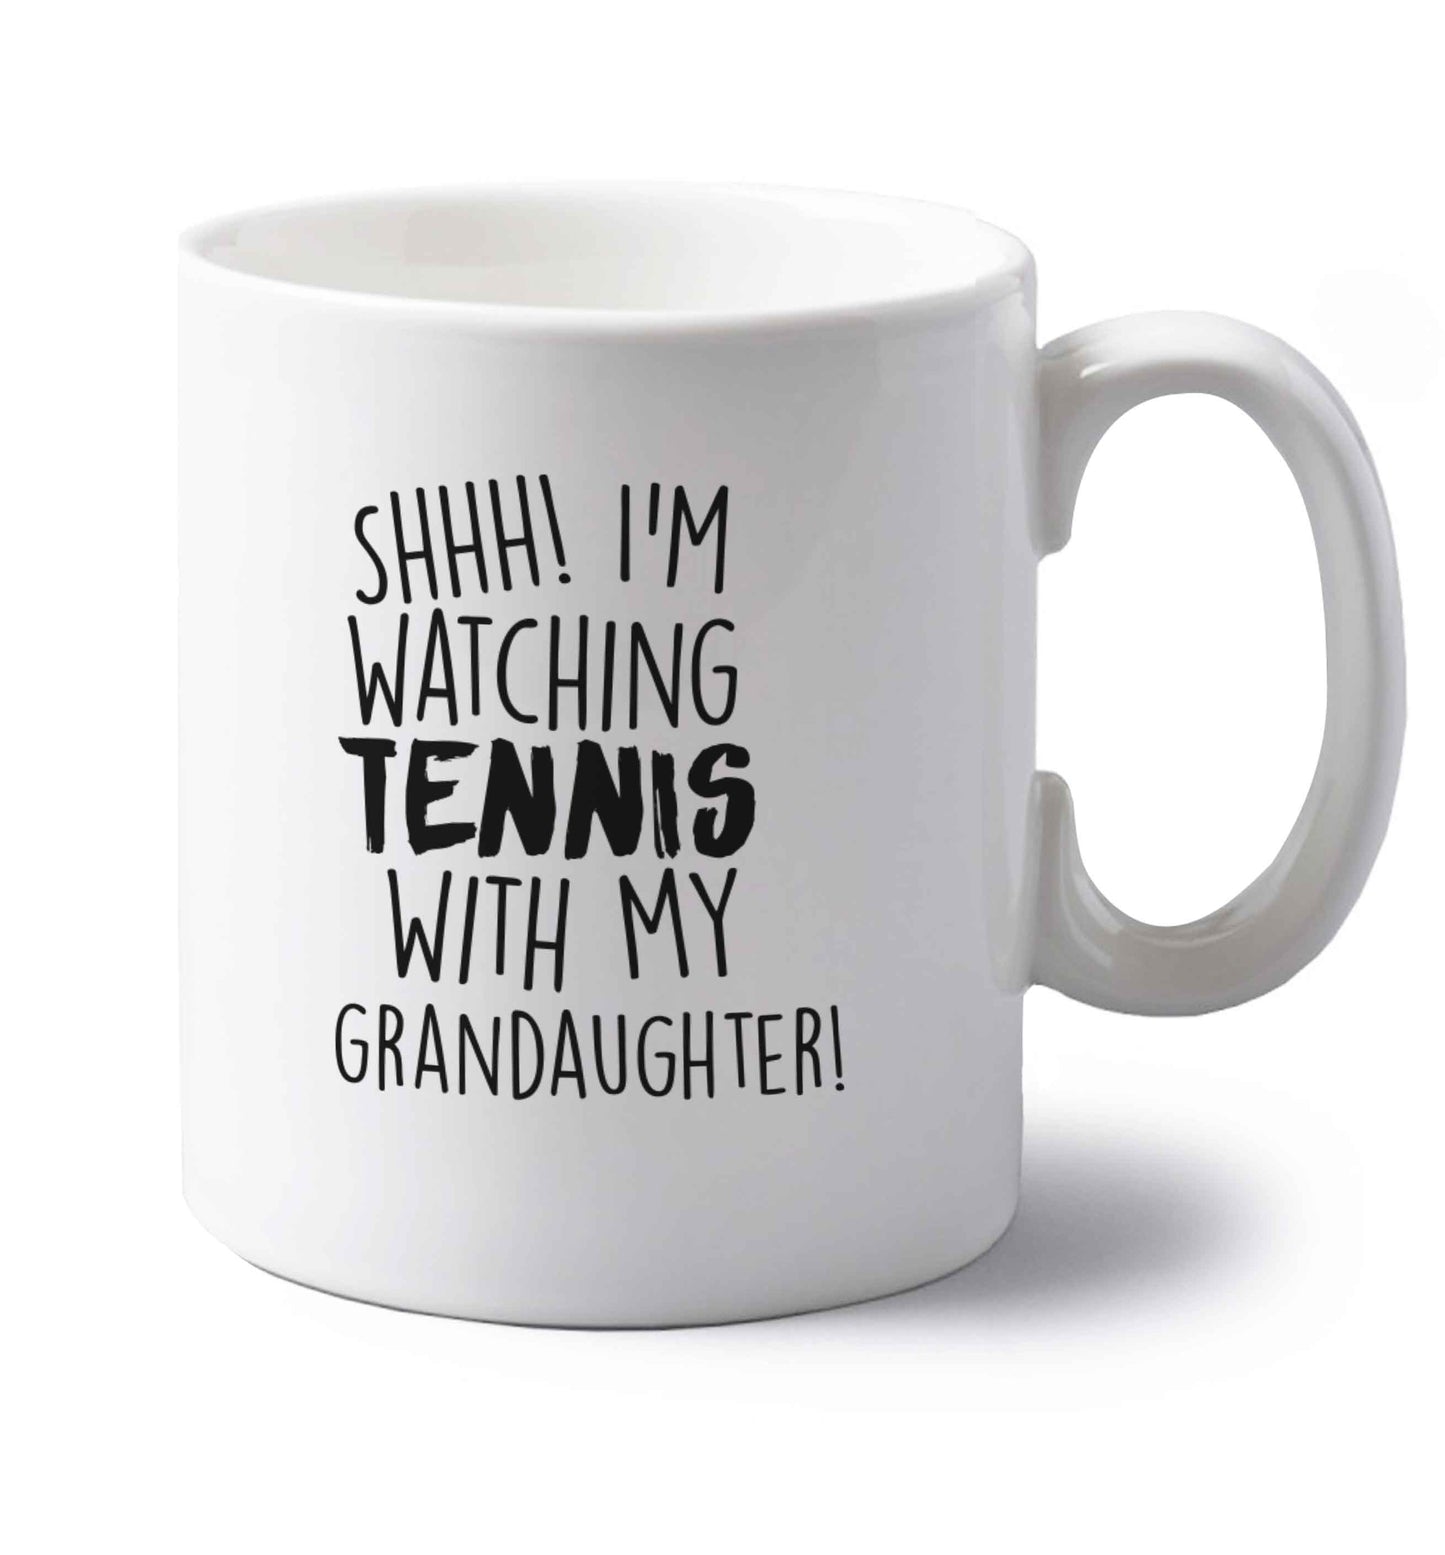 Shh! I'm watching tennis with my granddaughter! left handed white ceramic mug 